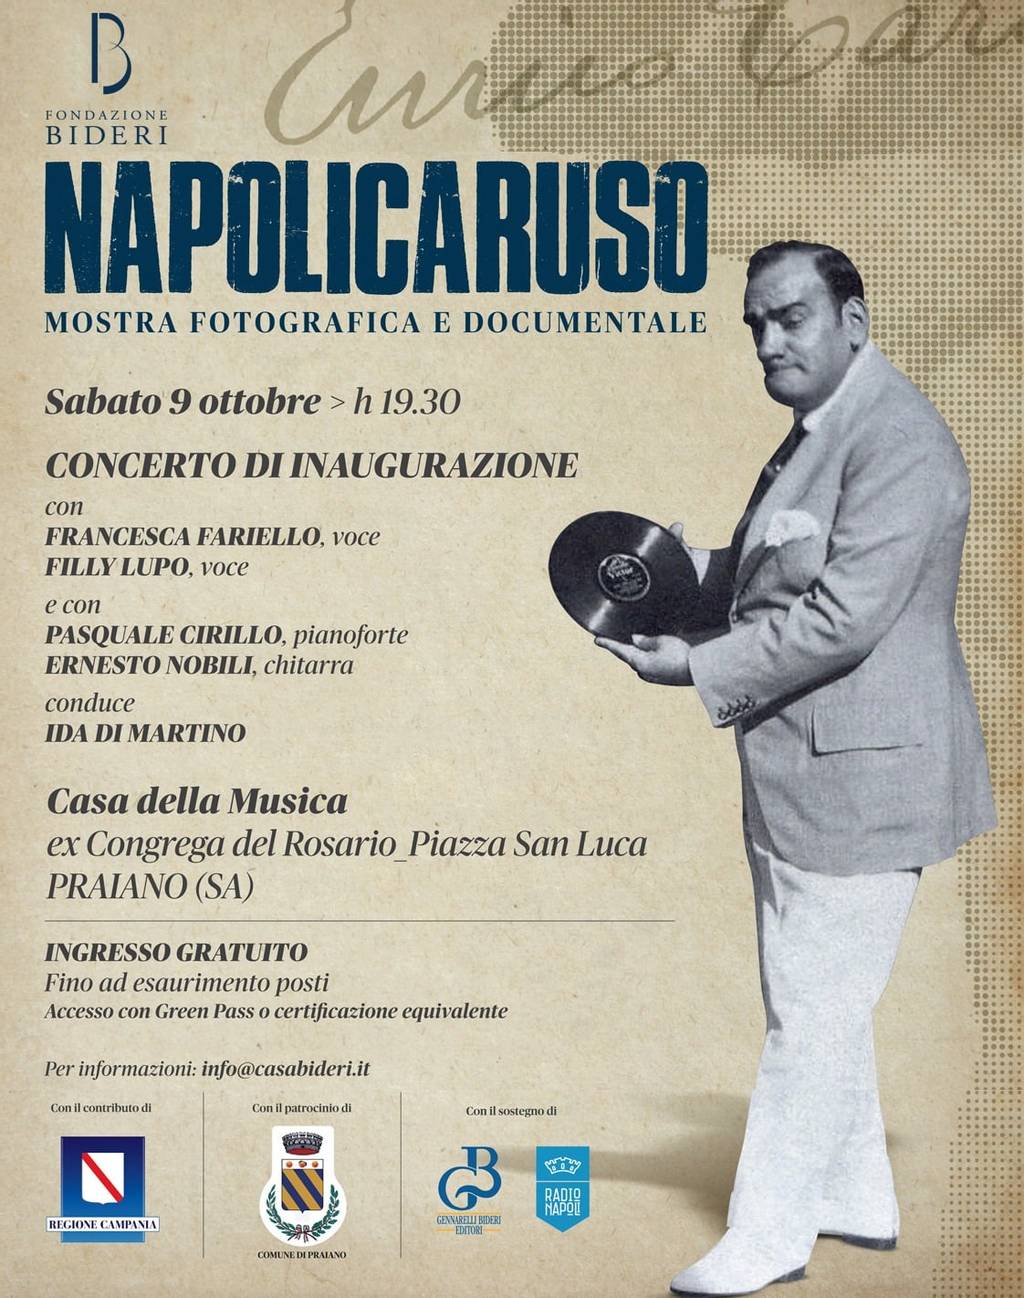 NapoliCaruso, opening concert